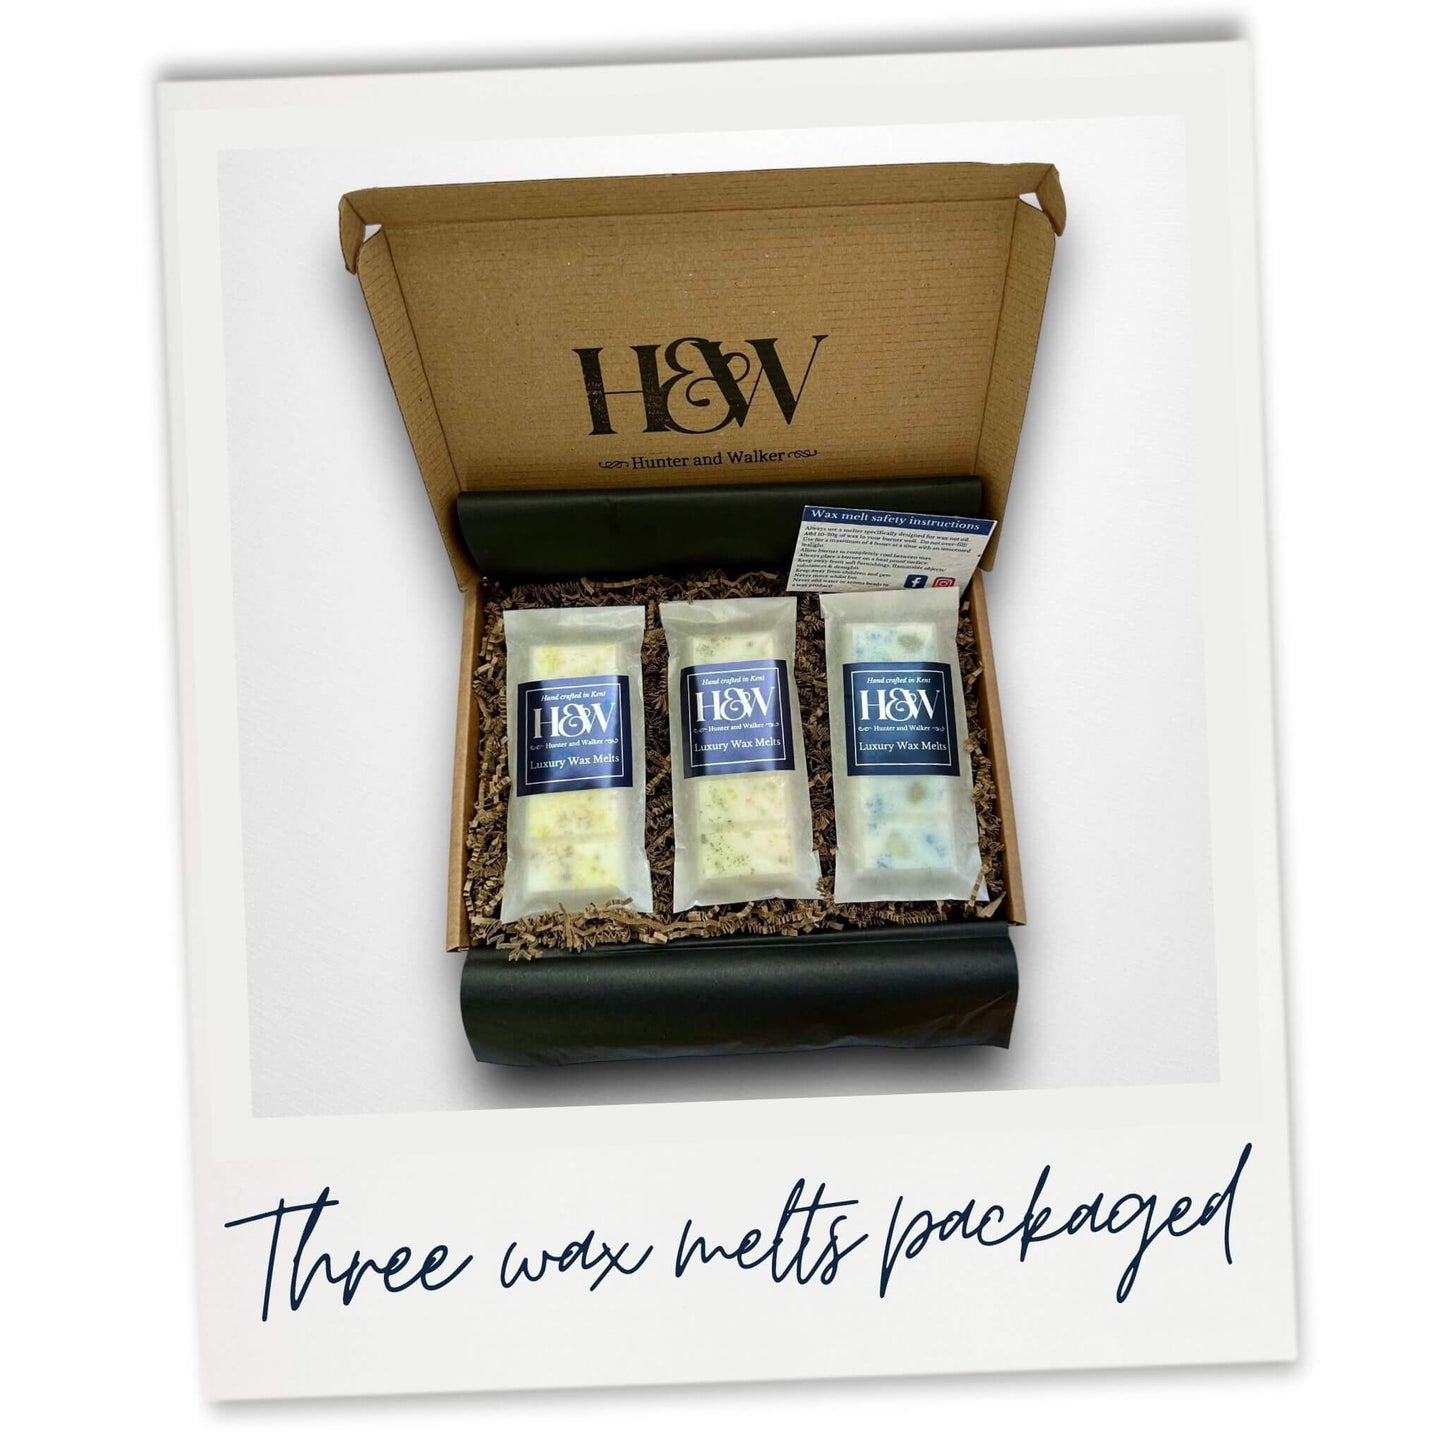 How our luxury wax melts are packaged for delivery.